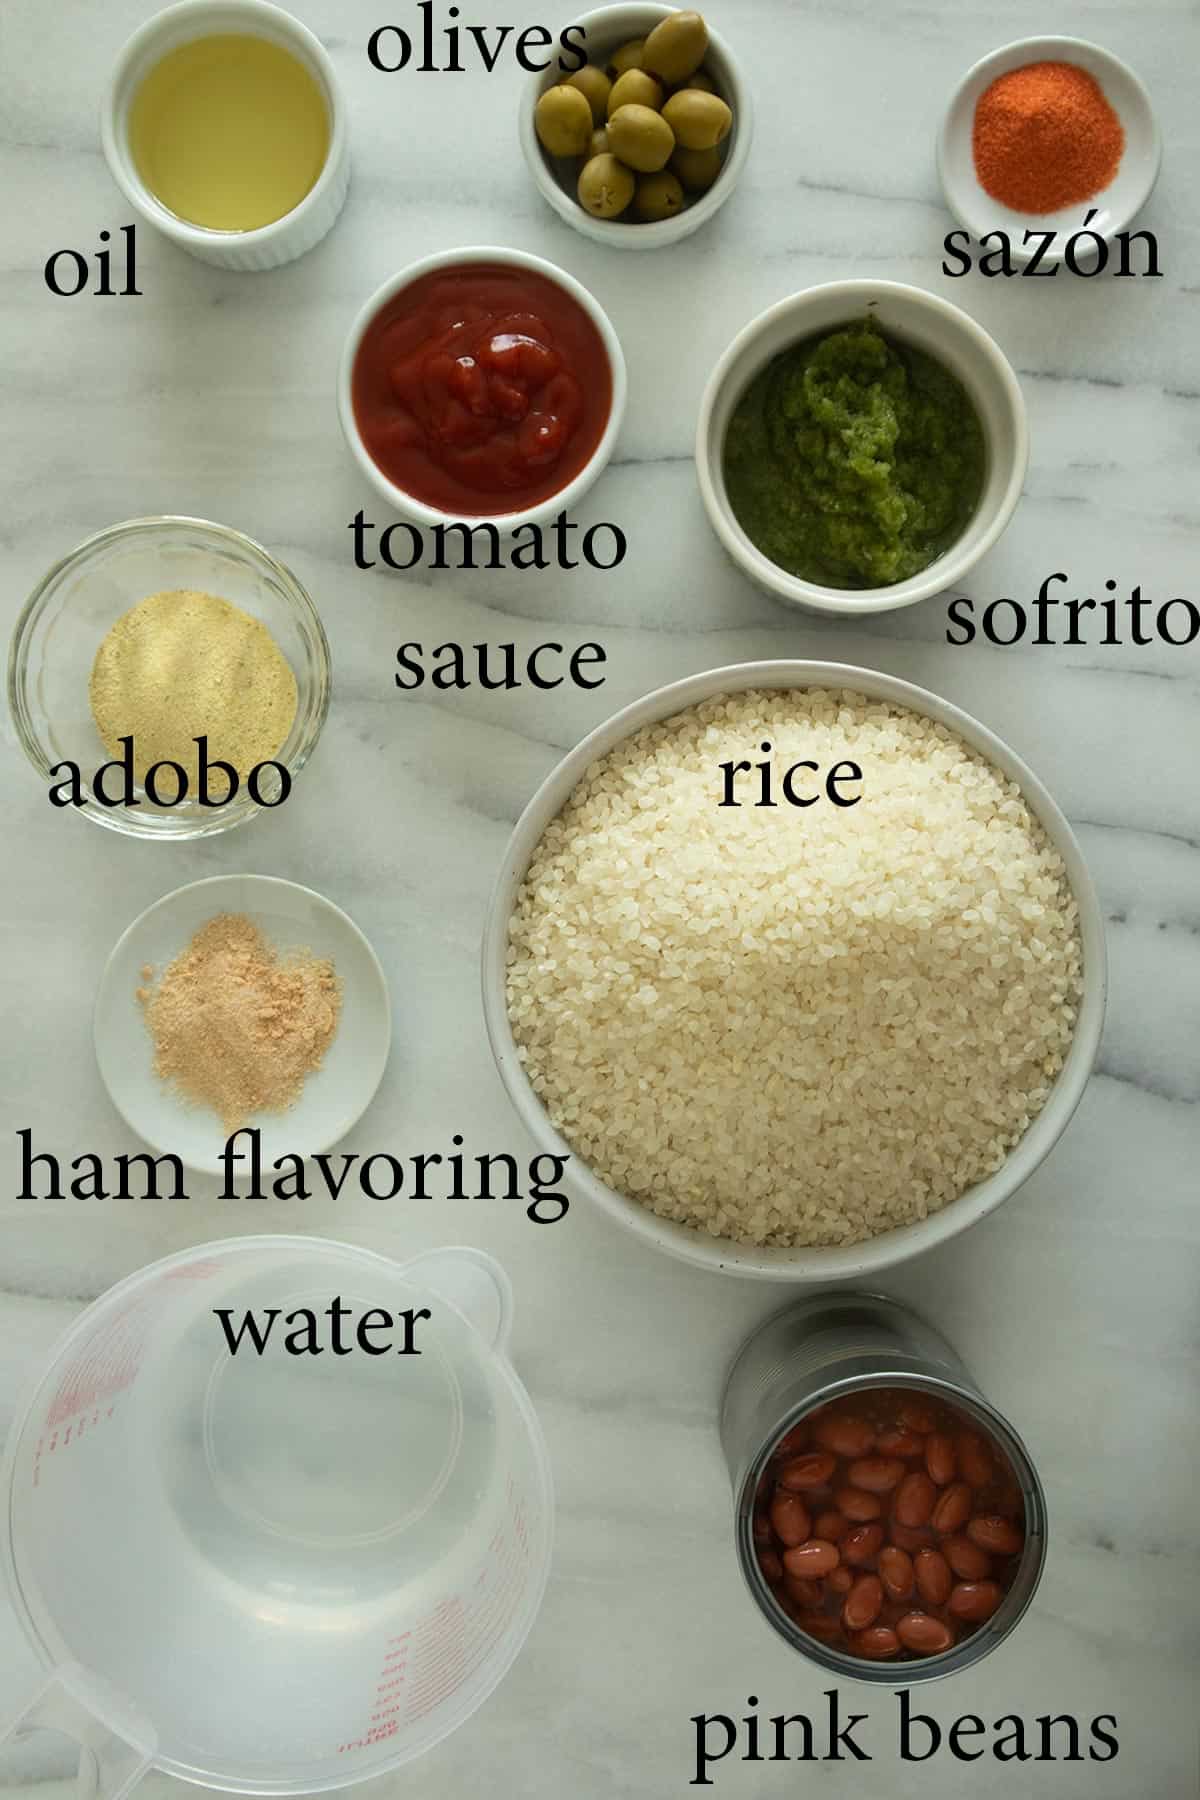 ingredients needed to make puerto rican rice and beans.